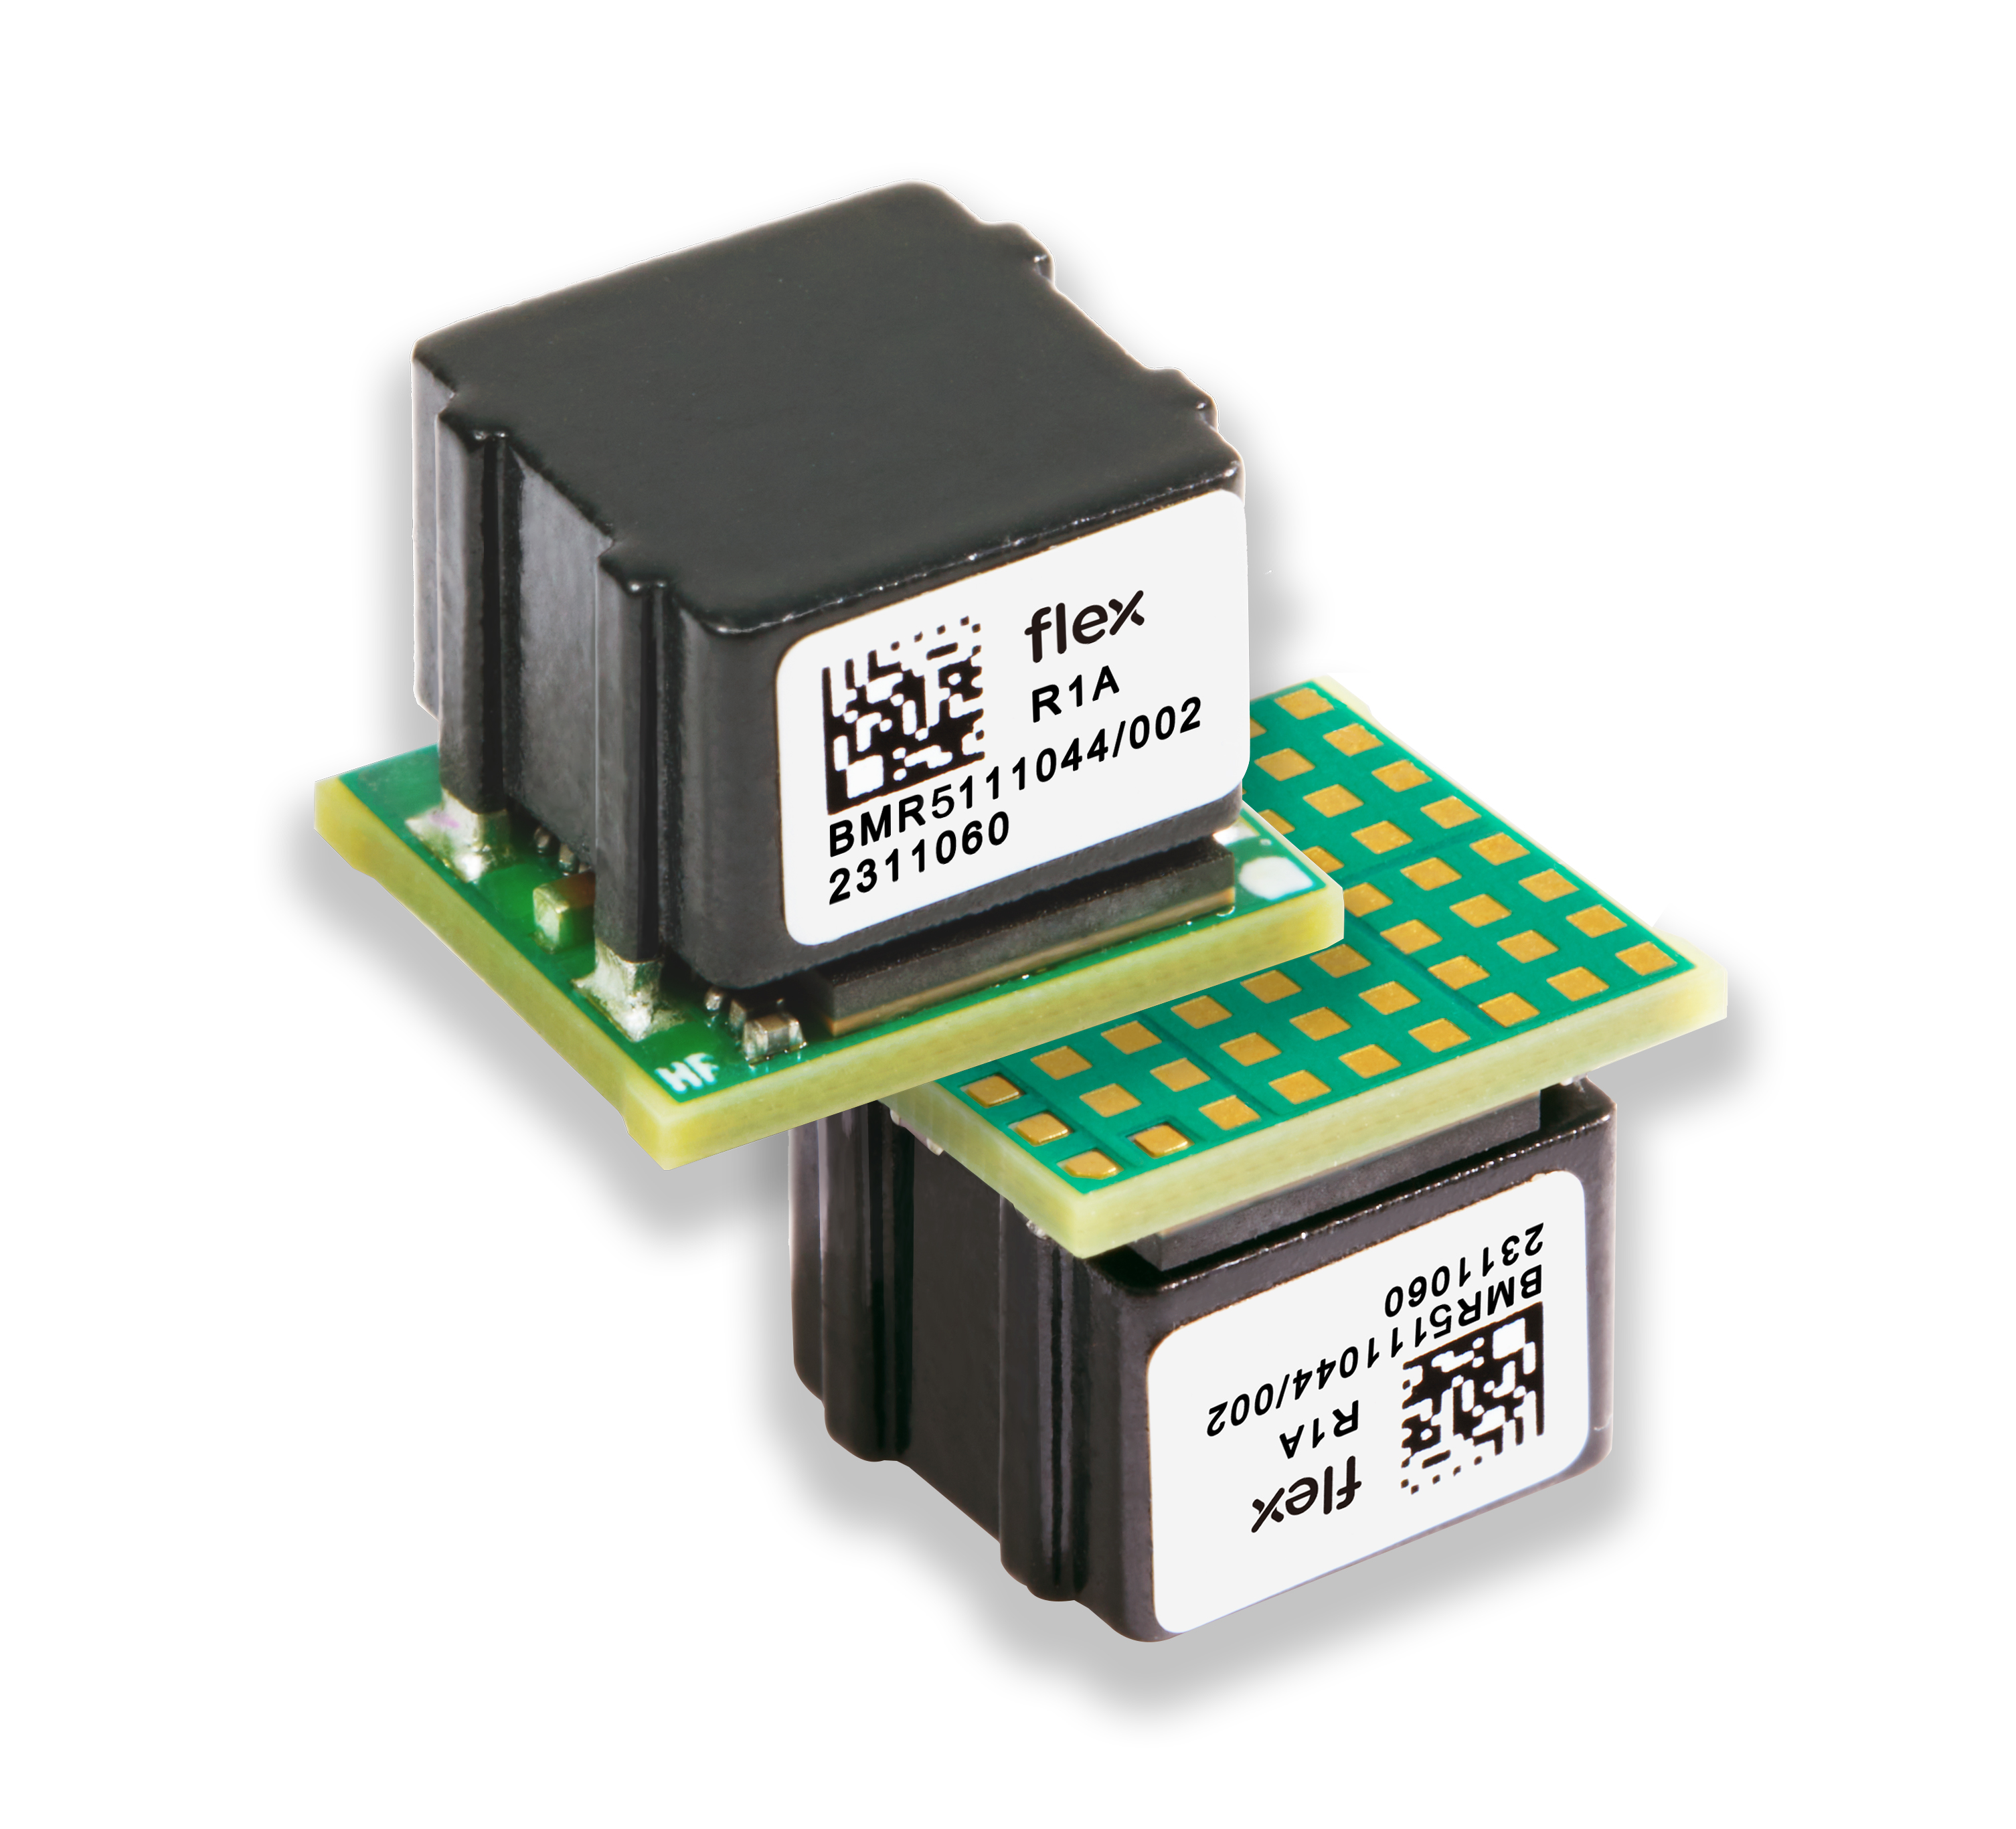 Integrated VRM Power Stage Provides up to 140 A Peak